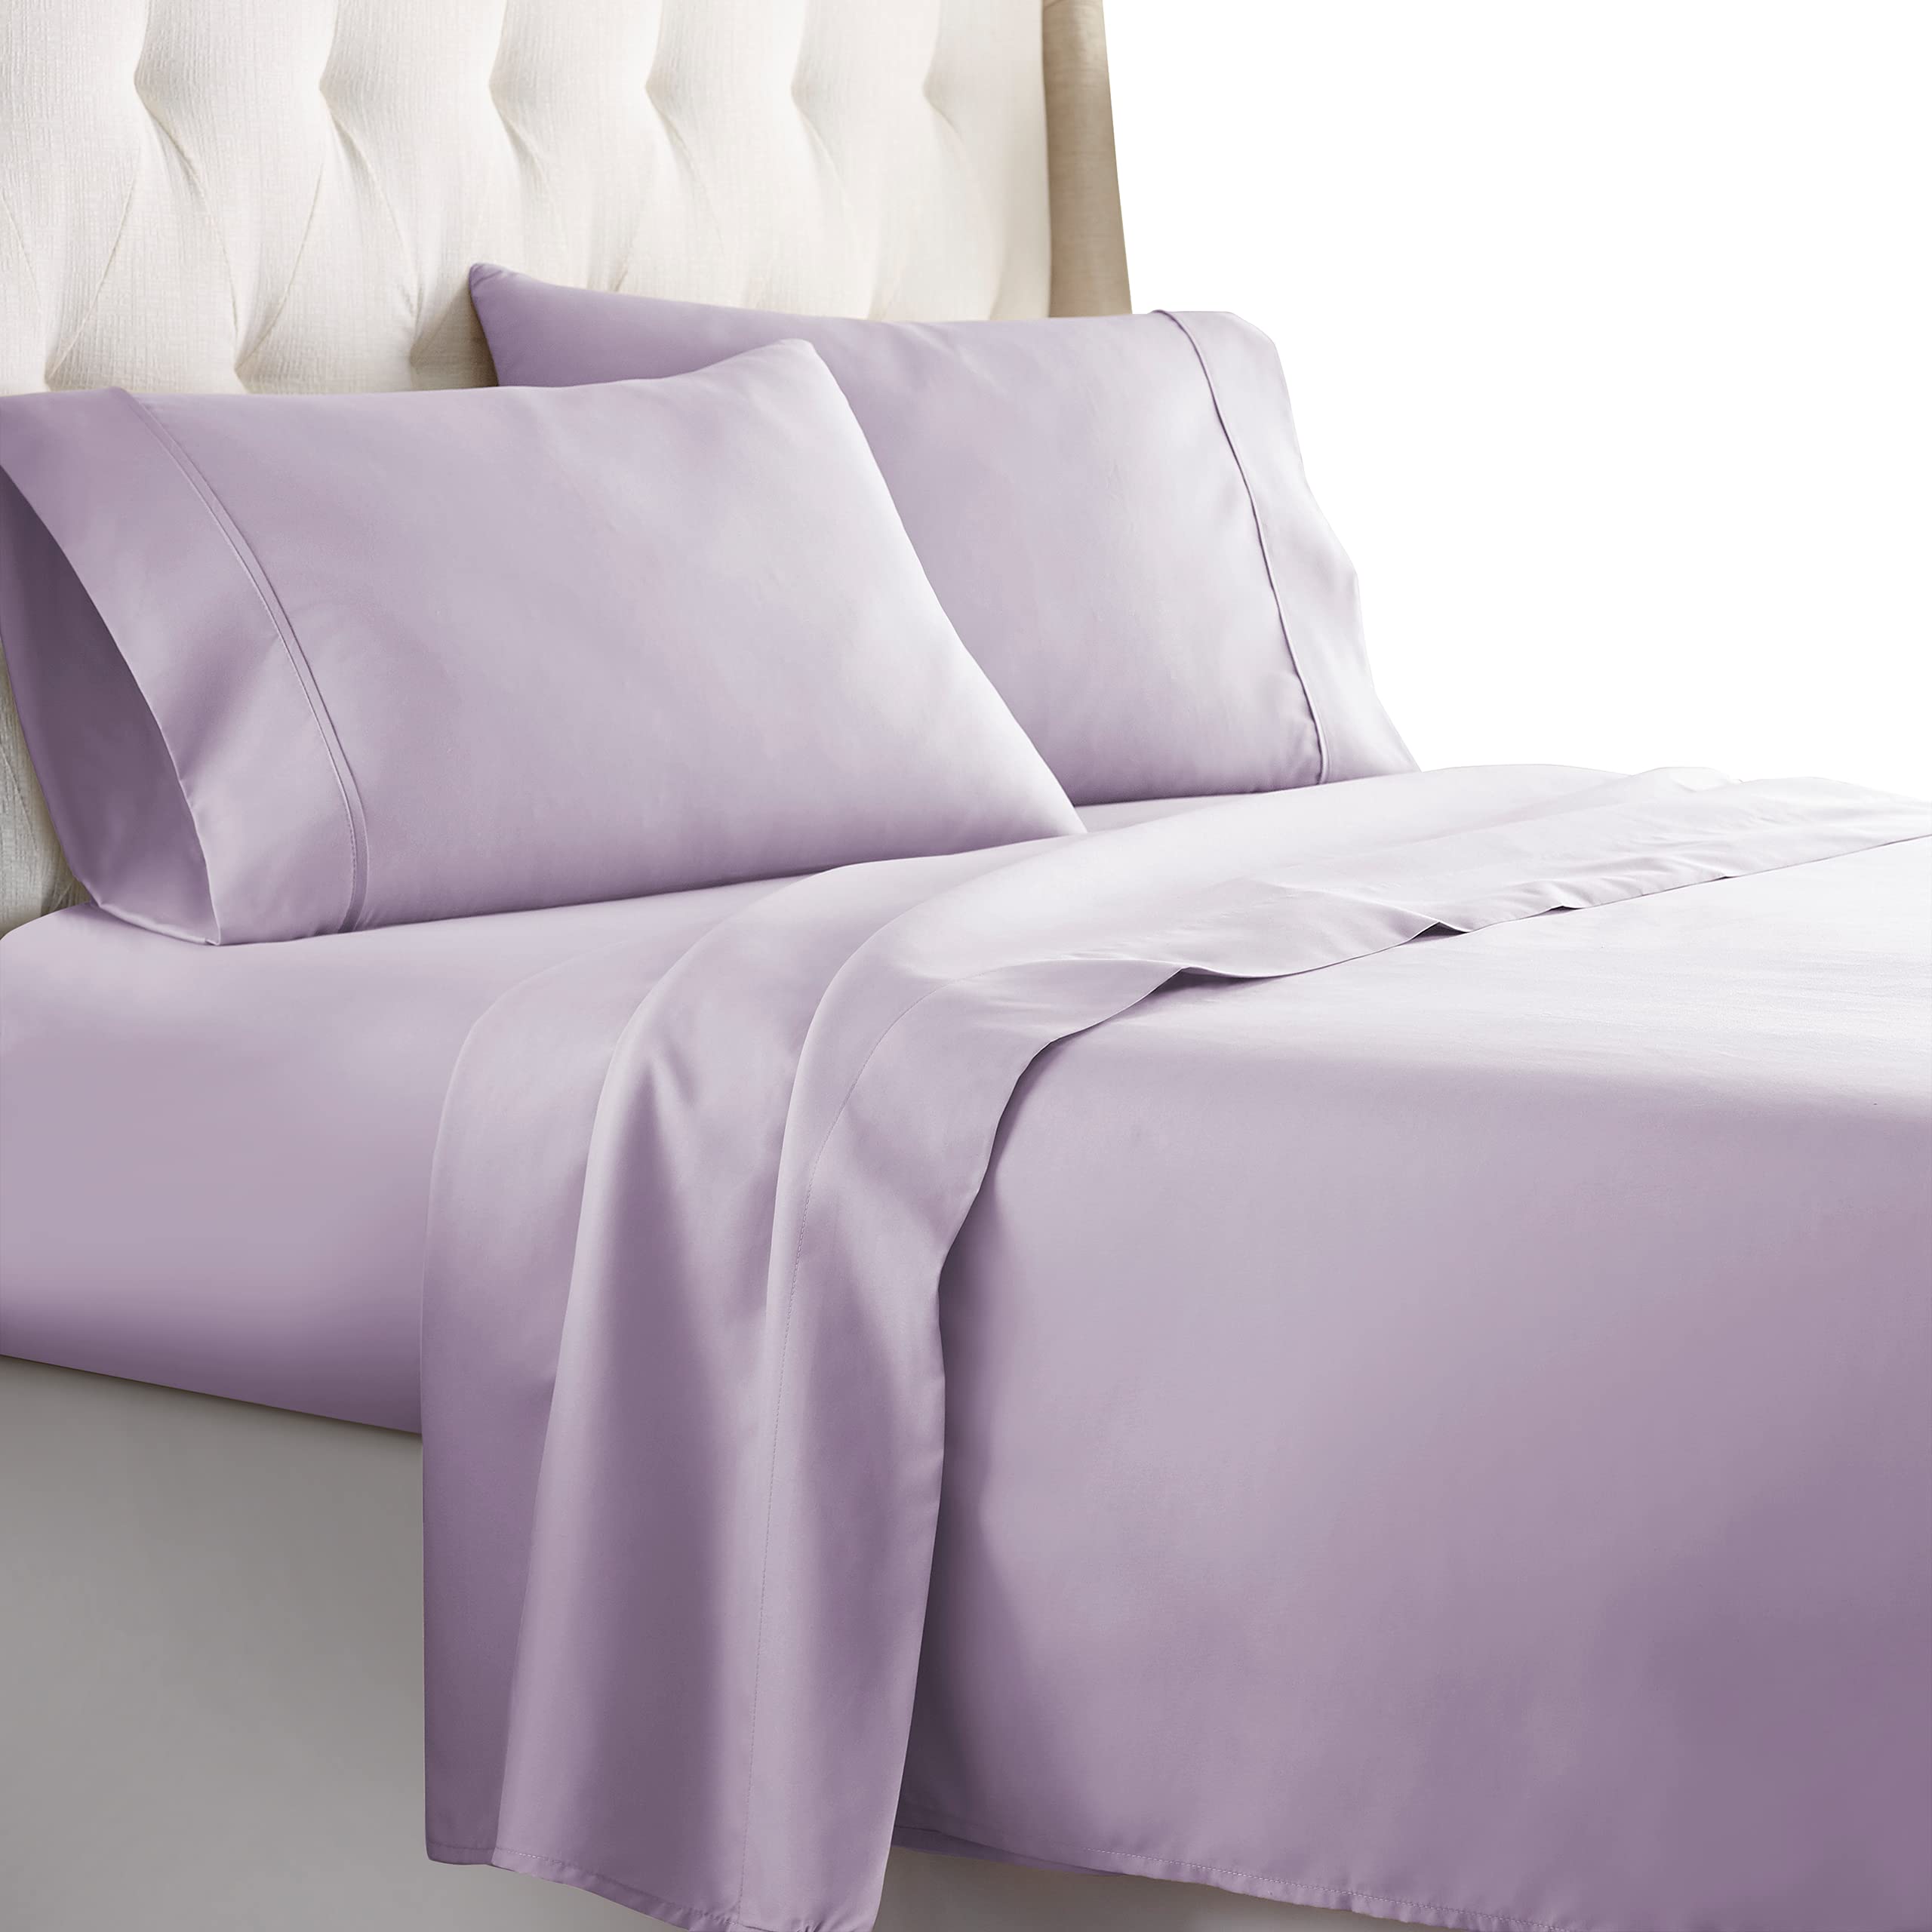 Book Cover HC COLLECTION Twin Size Sheets Set - Bedding Sheets & Pillowcases w/ 16 inch Deep Pockets - Fade Resistant & Machine Washable - 3 Piece 1800 Series Twin Bed Sheet Sets – Lavender Lavender Twin